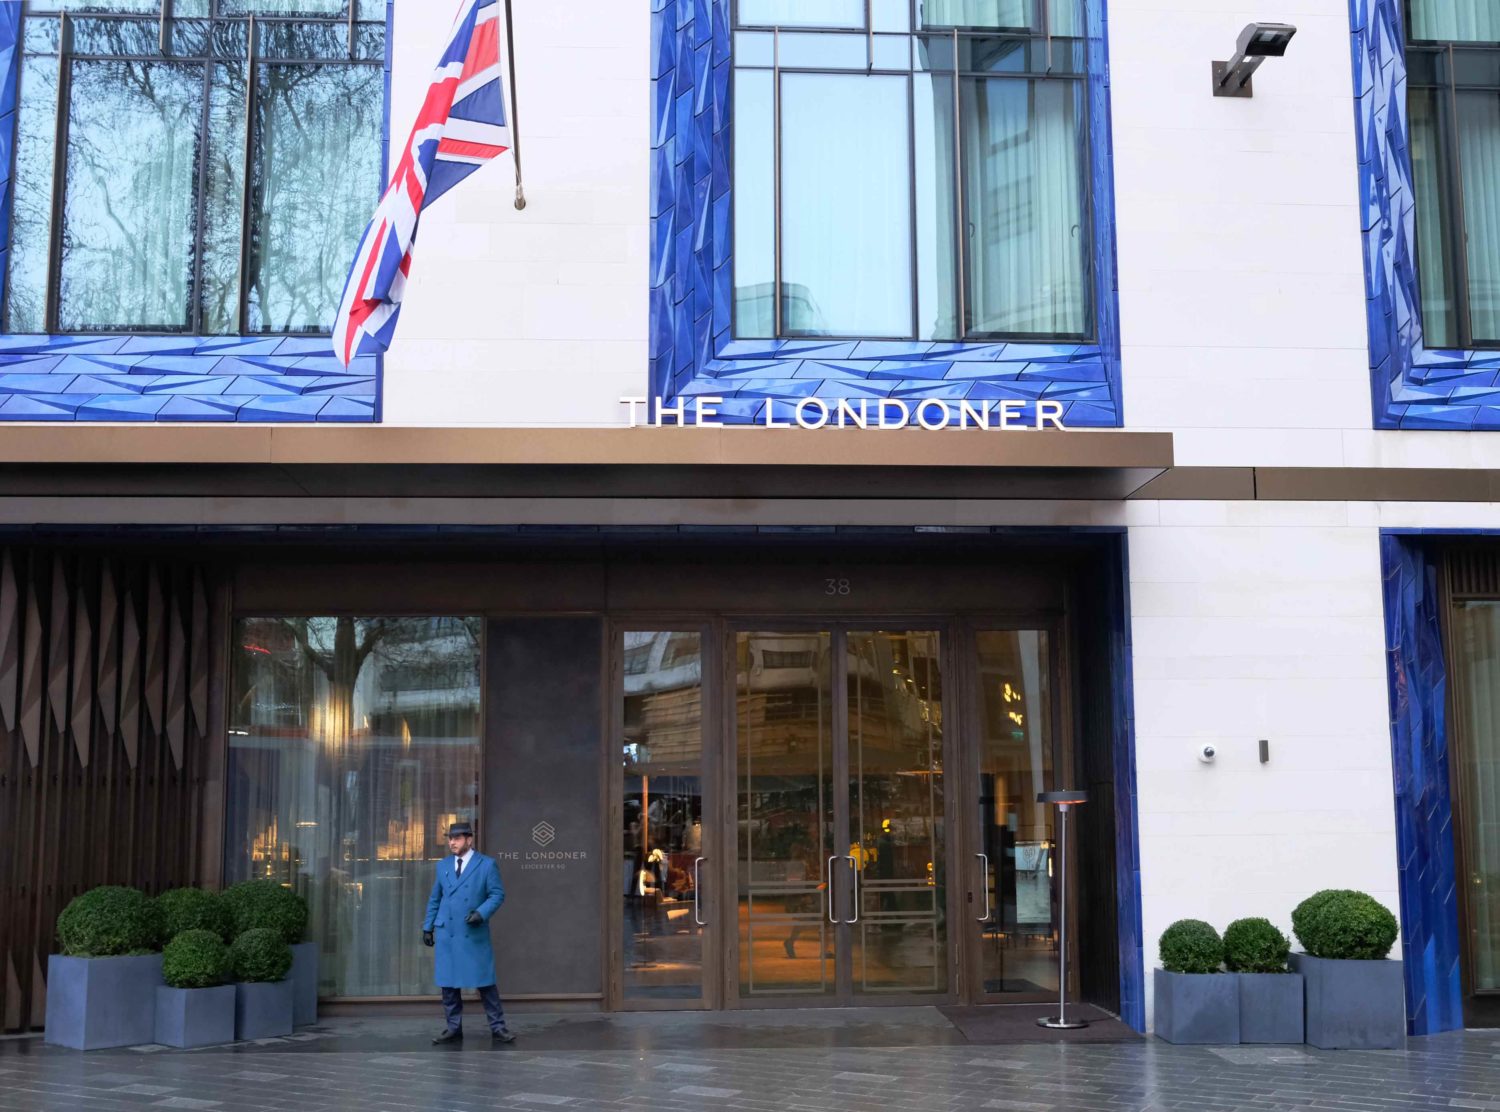 The Londoner Across Leicester Square, dodging tourists on a mission for M&M’s and Legos, you arrive at arguably the best named London hotel, The Londoner. Standing 8 floors tall, hiding 6 floors below ground and 350 rooms behind Ian Monroe's tiled façade, is a new phenomena — a 